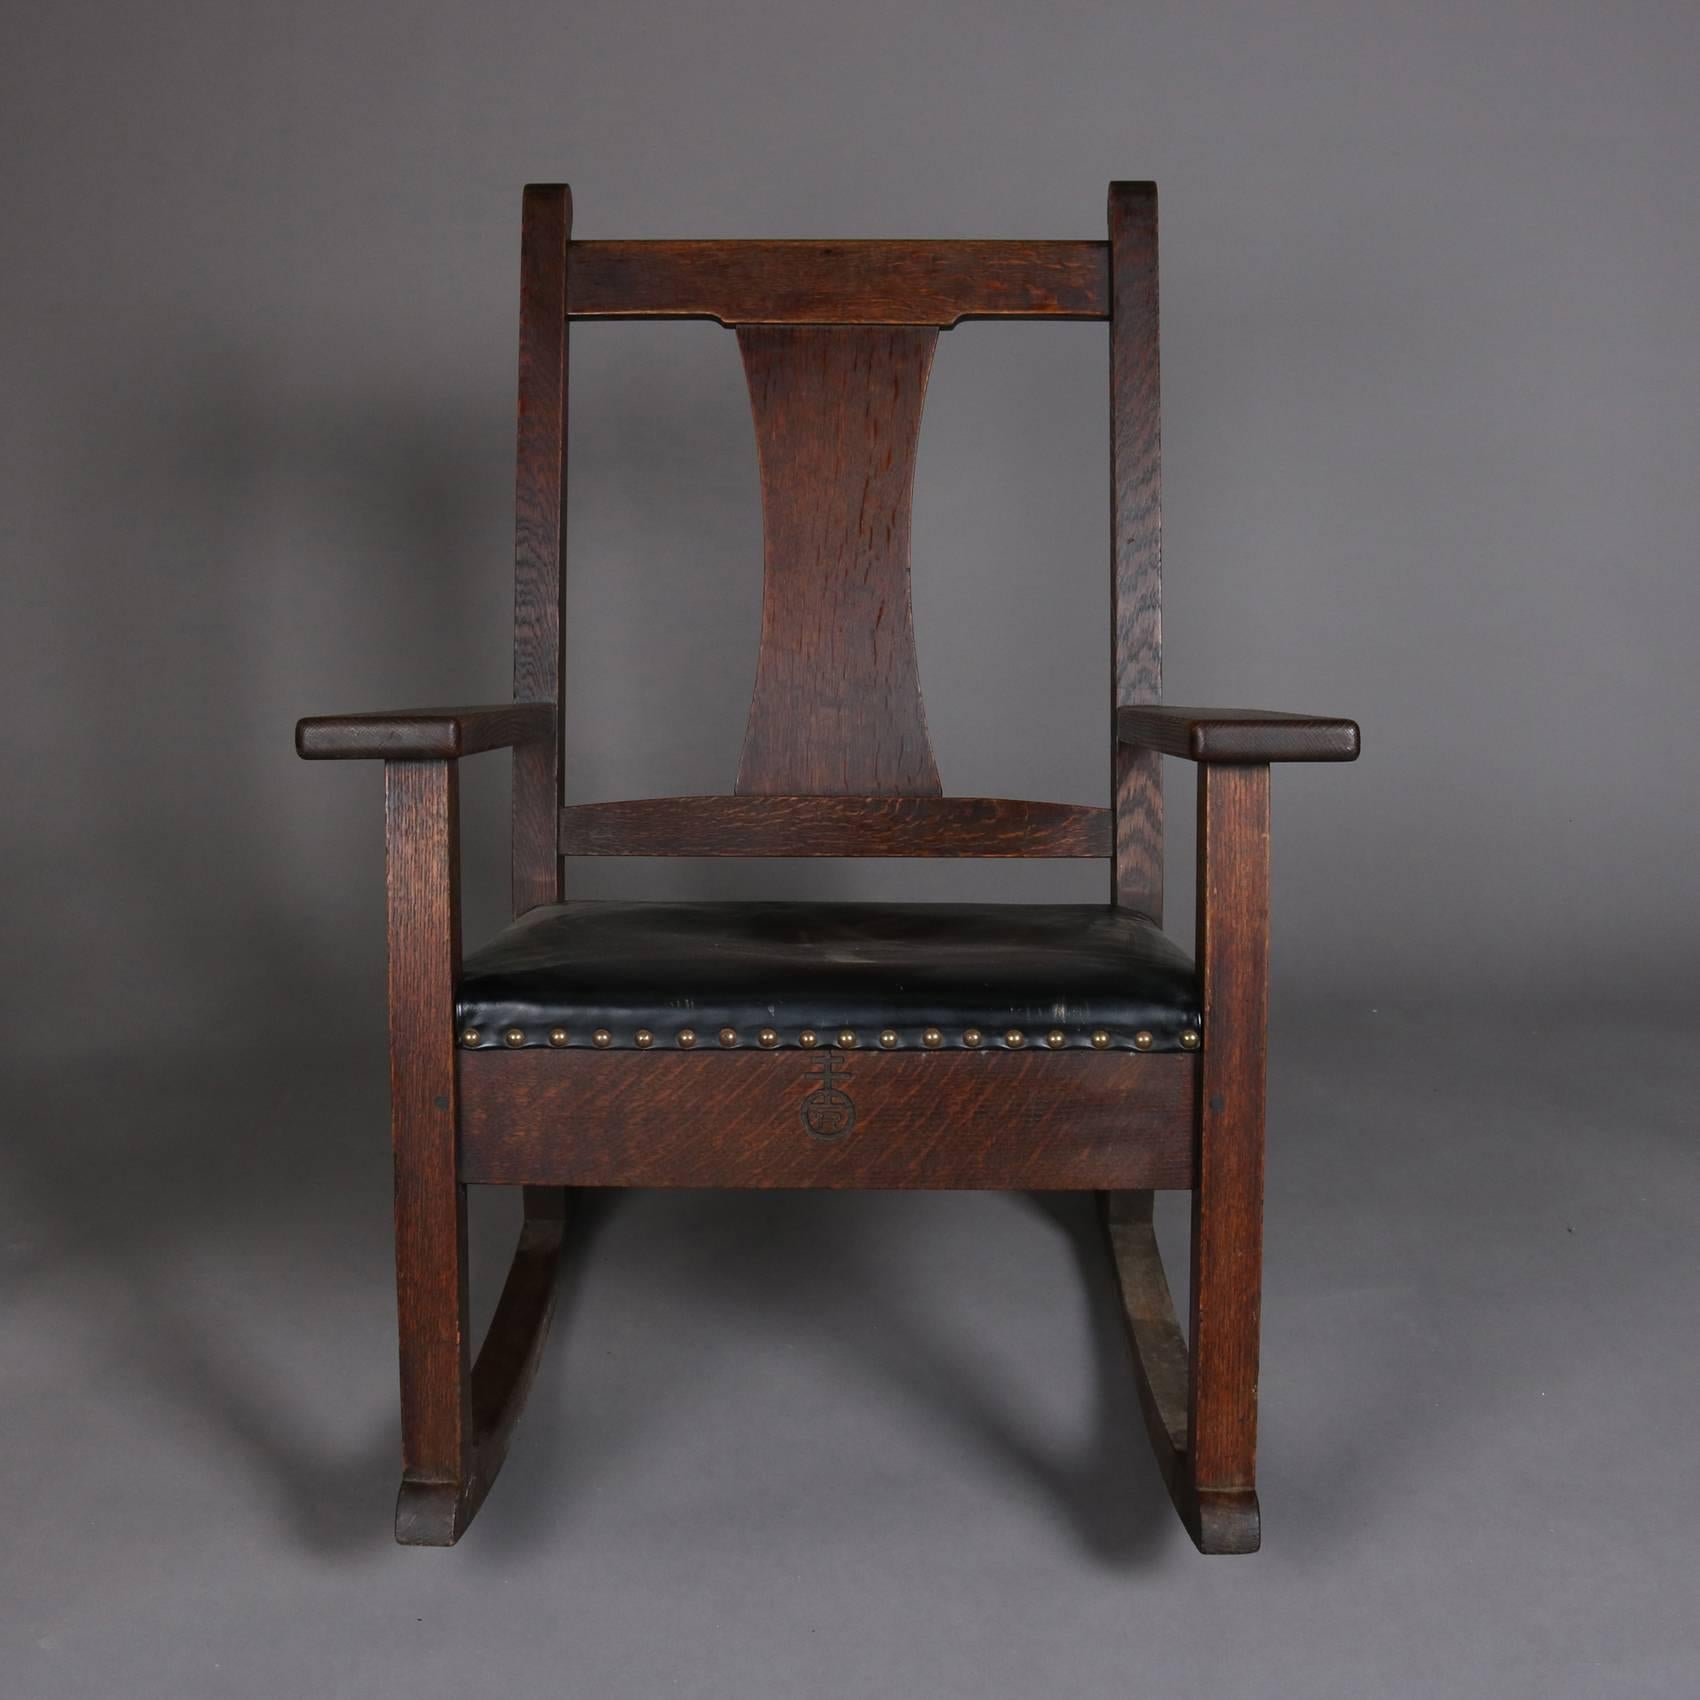 20th Century Antique Arts & Crafts Mission Oak Rocking Chair by Roycroft, Signed